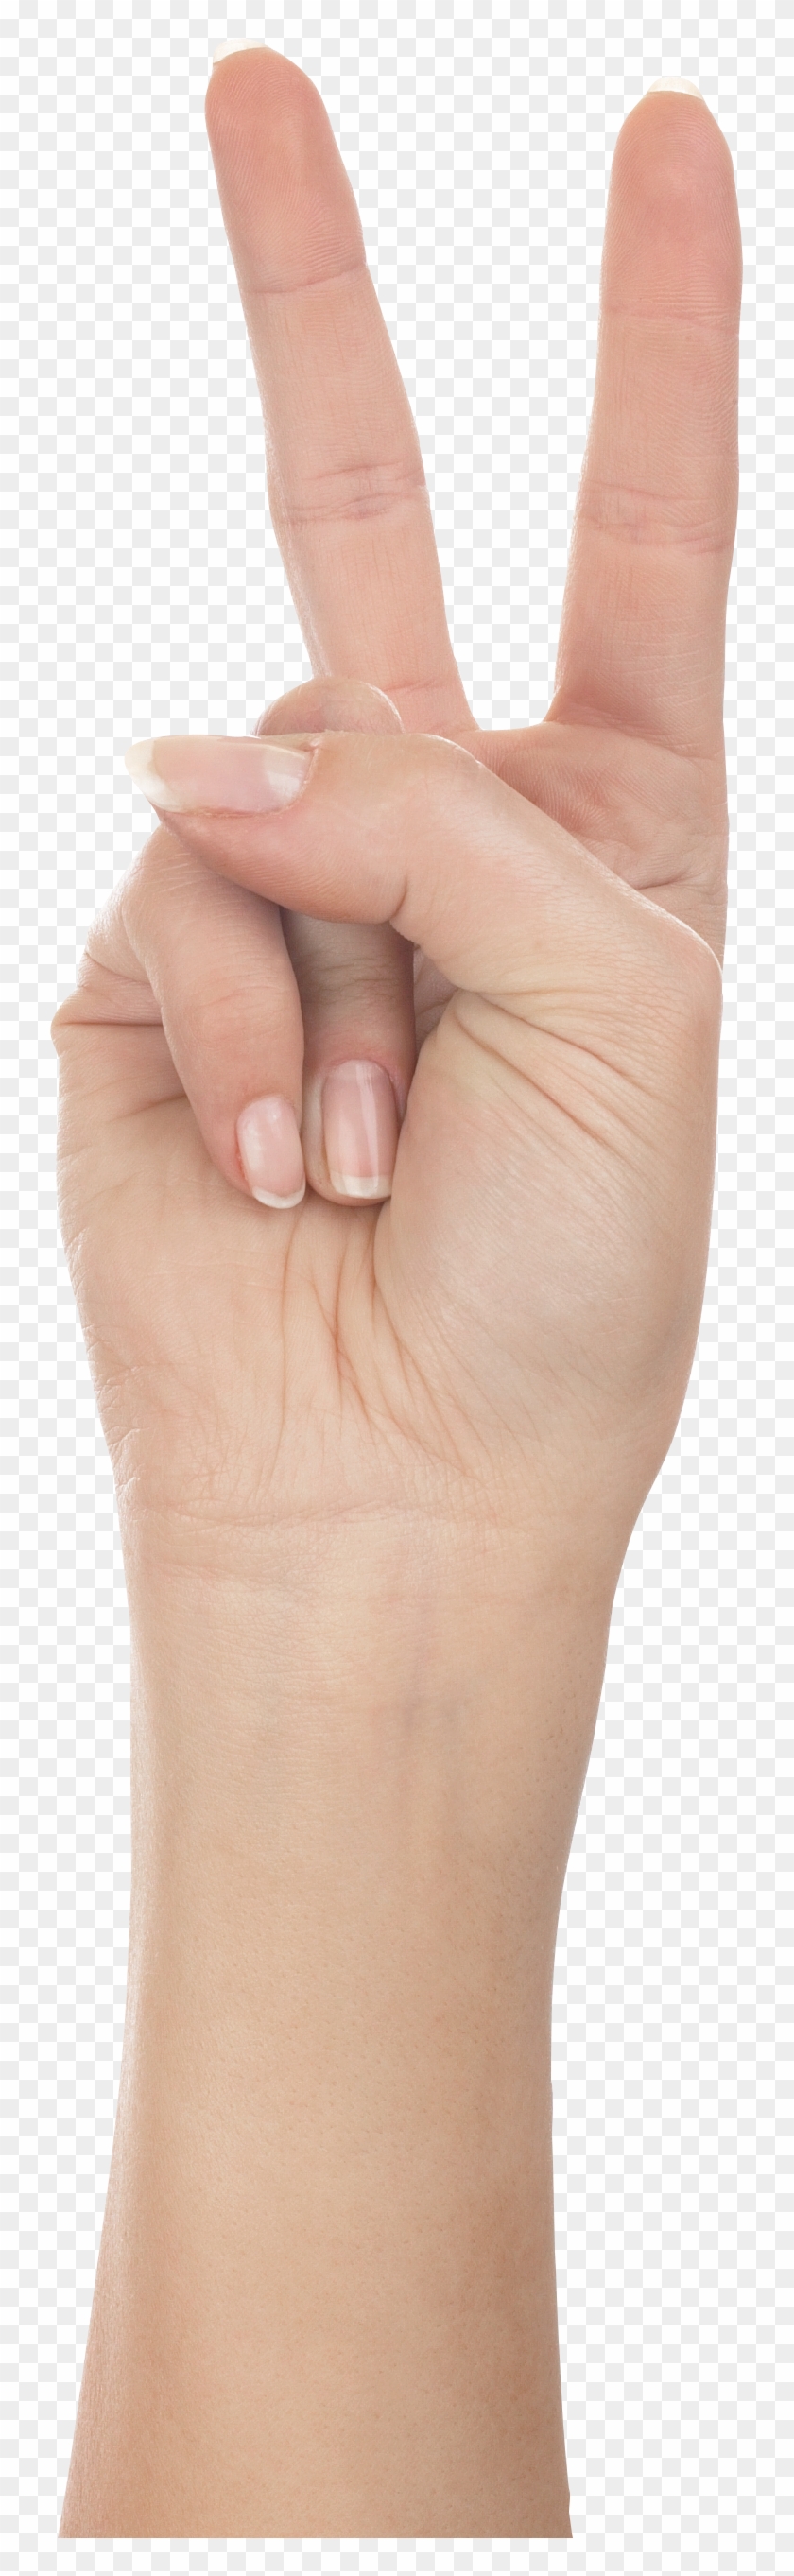 Two Hands Png - Thumb Clipart #4120336